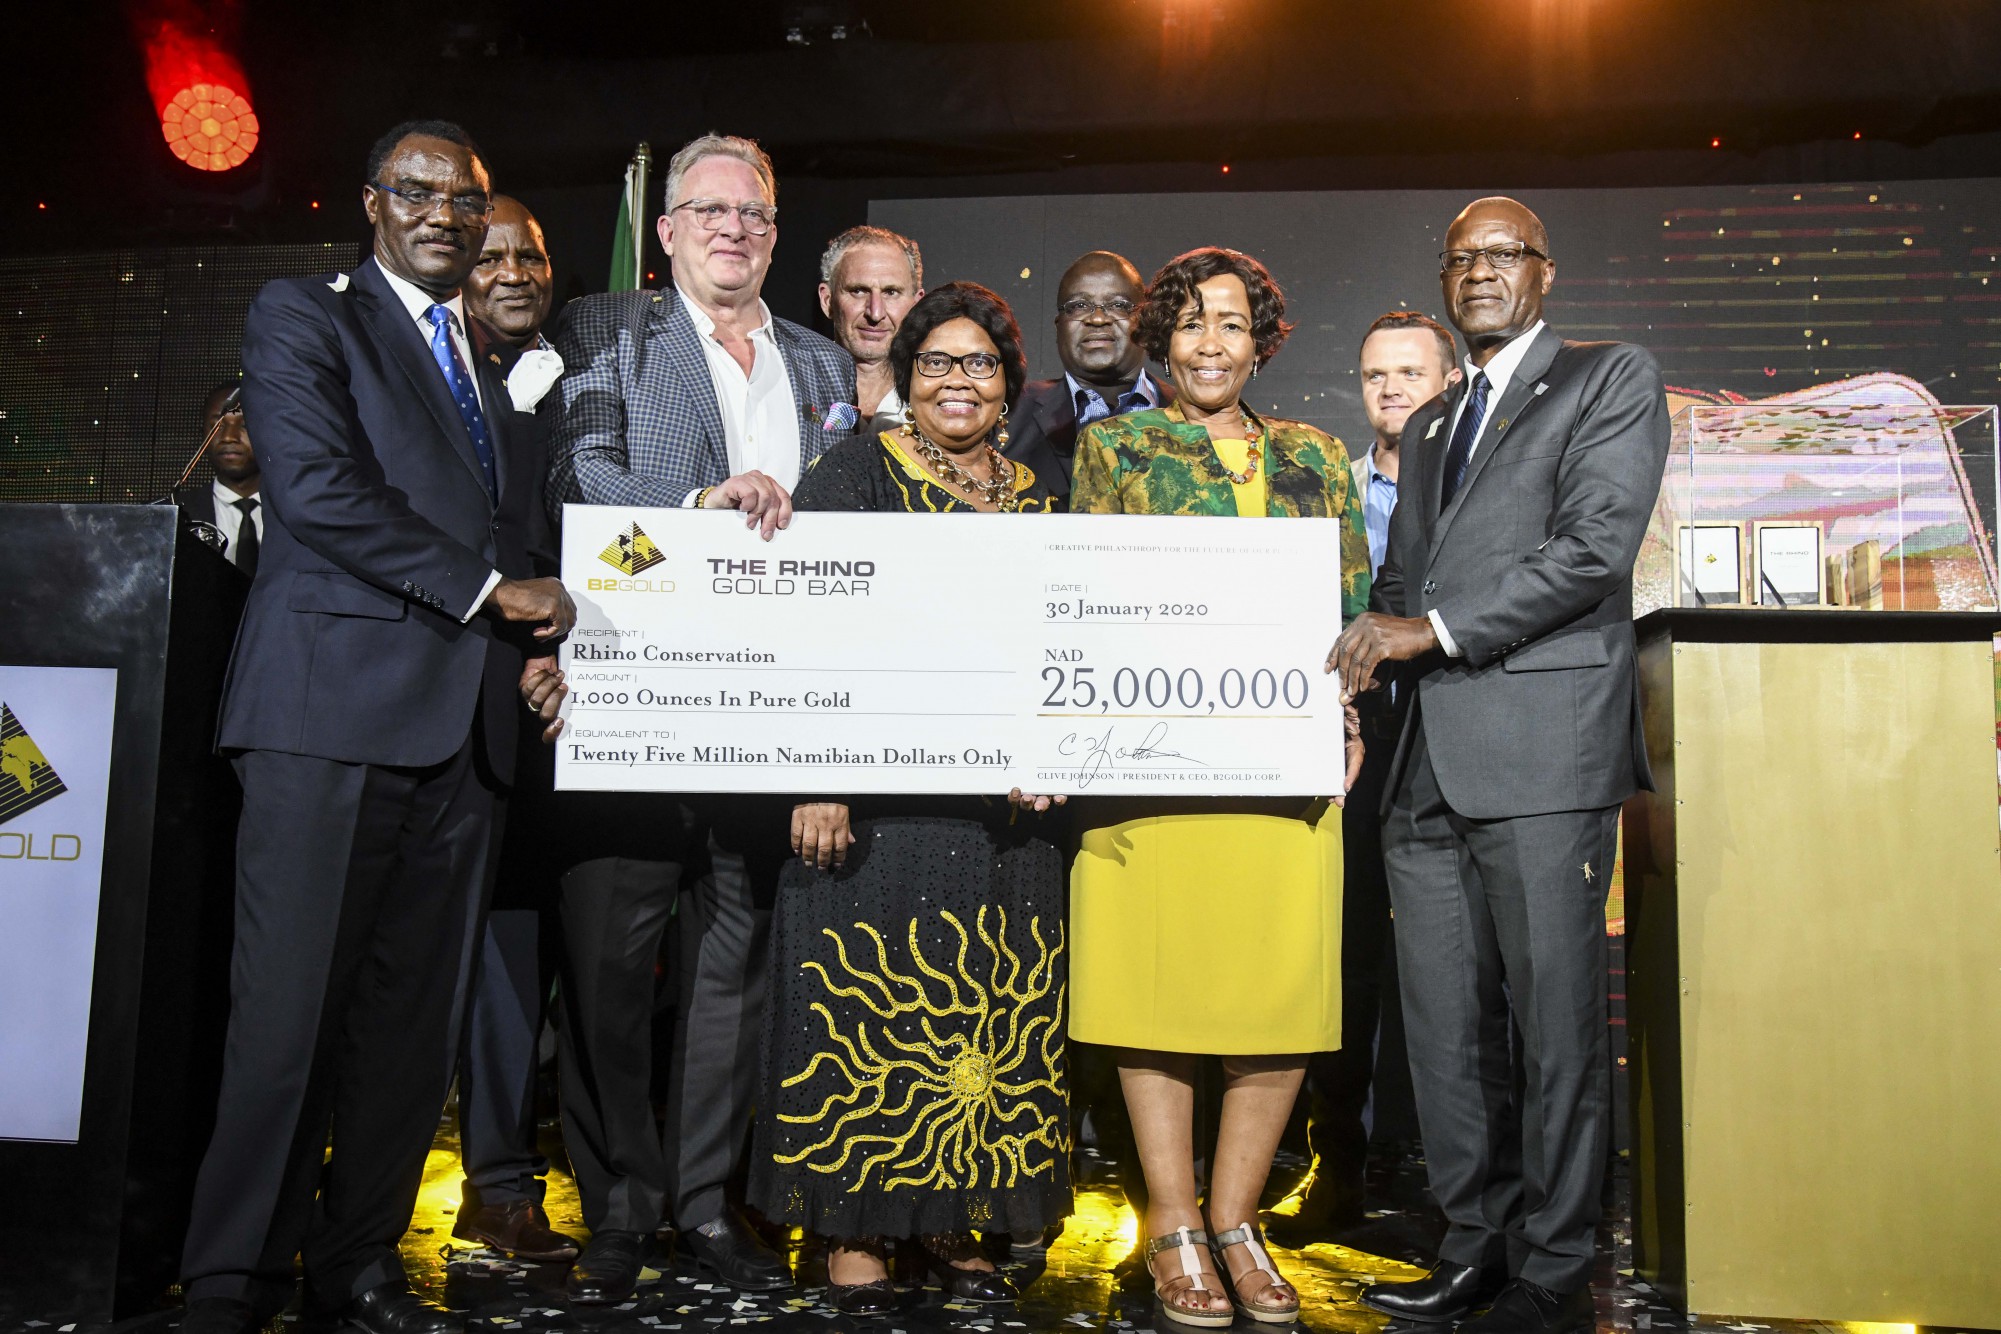 Front (left to right): Dr. Leake Hangala ( Director, B2Gold Namibia Proprietary Limited), Clive Johnson (President, CEO & Director, B2Gold Corp.), Honorable Bernadette Jagger (Deputy Minister of Environment and Tourism), Inge Zaamwani-Kamwi (Adviser to the President of the Republic of Namibia, Dr Hage Geingob) and Tom Alweendo (Minister of Mines and Energy) Back (left to right): Simson Uri-Khob (CEO, Save the Rhino Trust), Mark Dawe (Country Manager and Managing Director – Namibia, B2Gold Corp.), John Kasaona (Executive Director, Integrated Rural Development and Nature Conservation), and John Roos (Reporting & Projects- Manager, B2Gold Corp.)